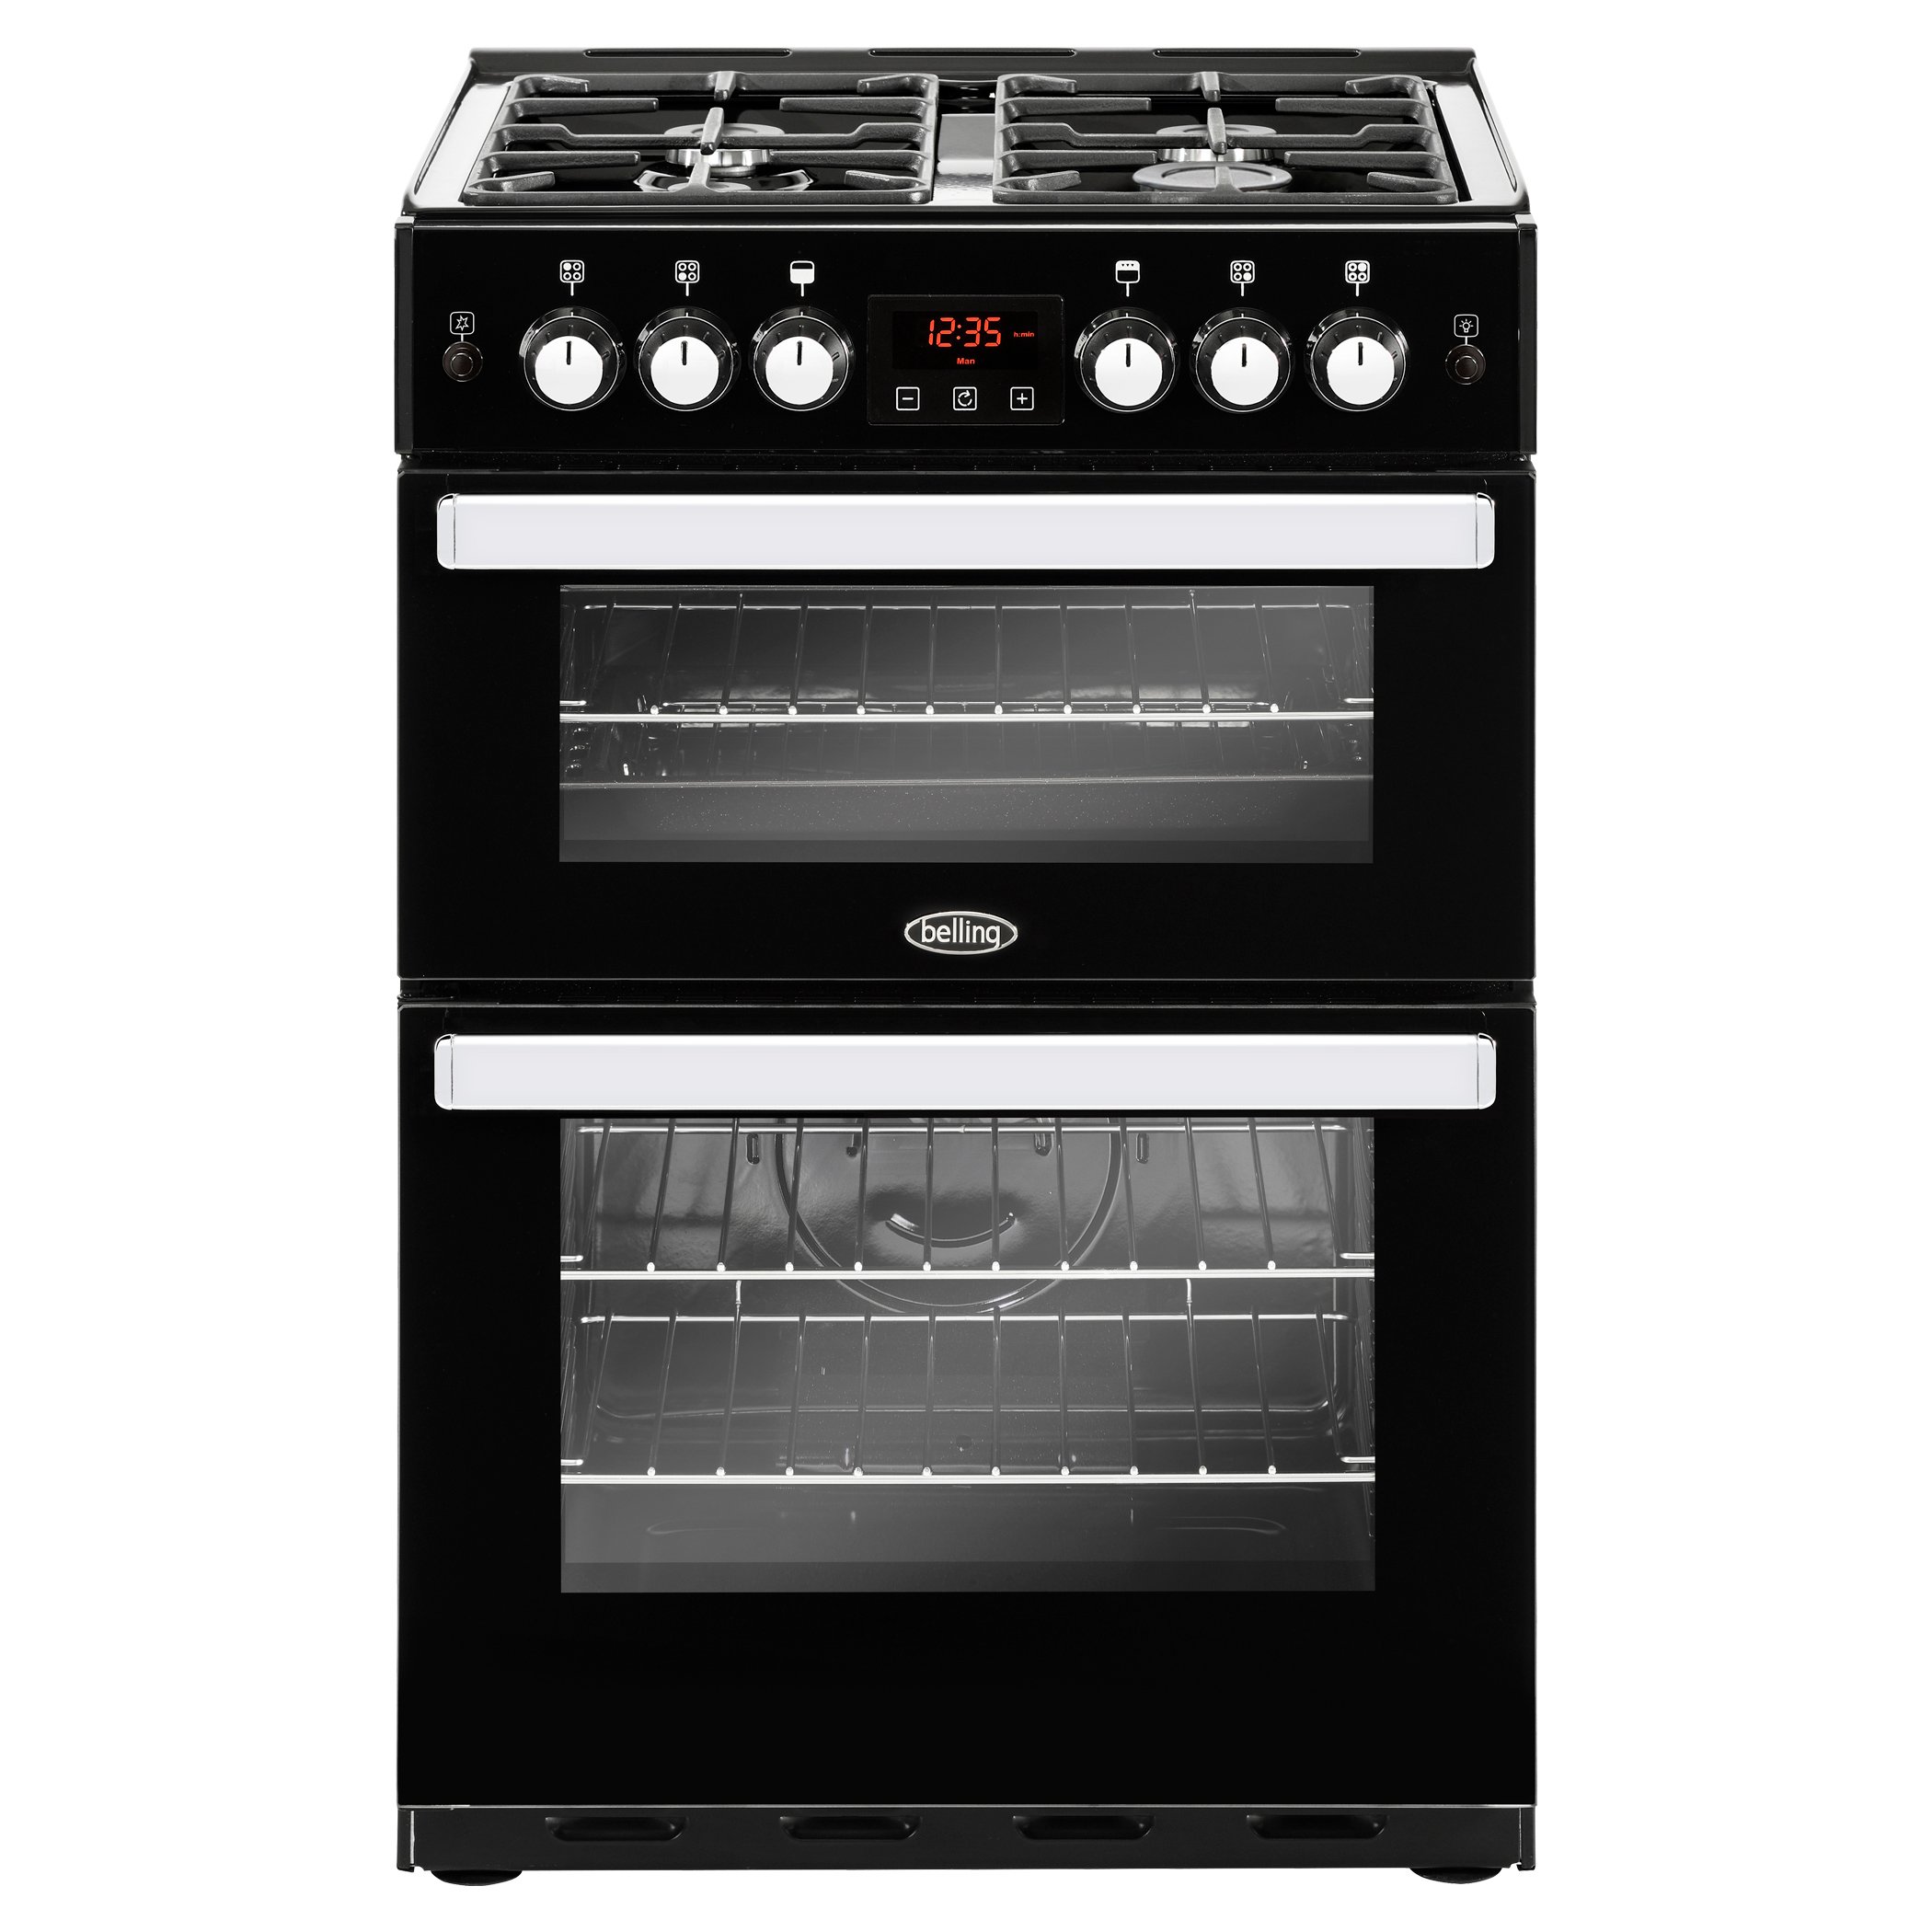 60cm Gas Range Cooker With A 4 Burner Gas Hob, Conventional Gas Oven & Electric Grill and Conventional Gas Main Oven